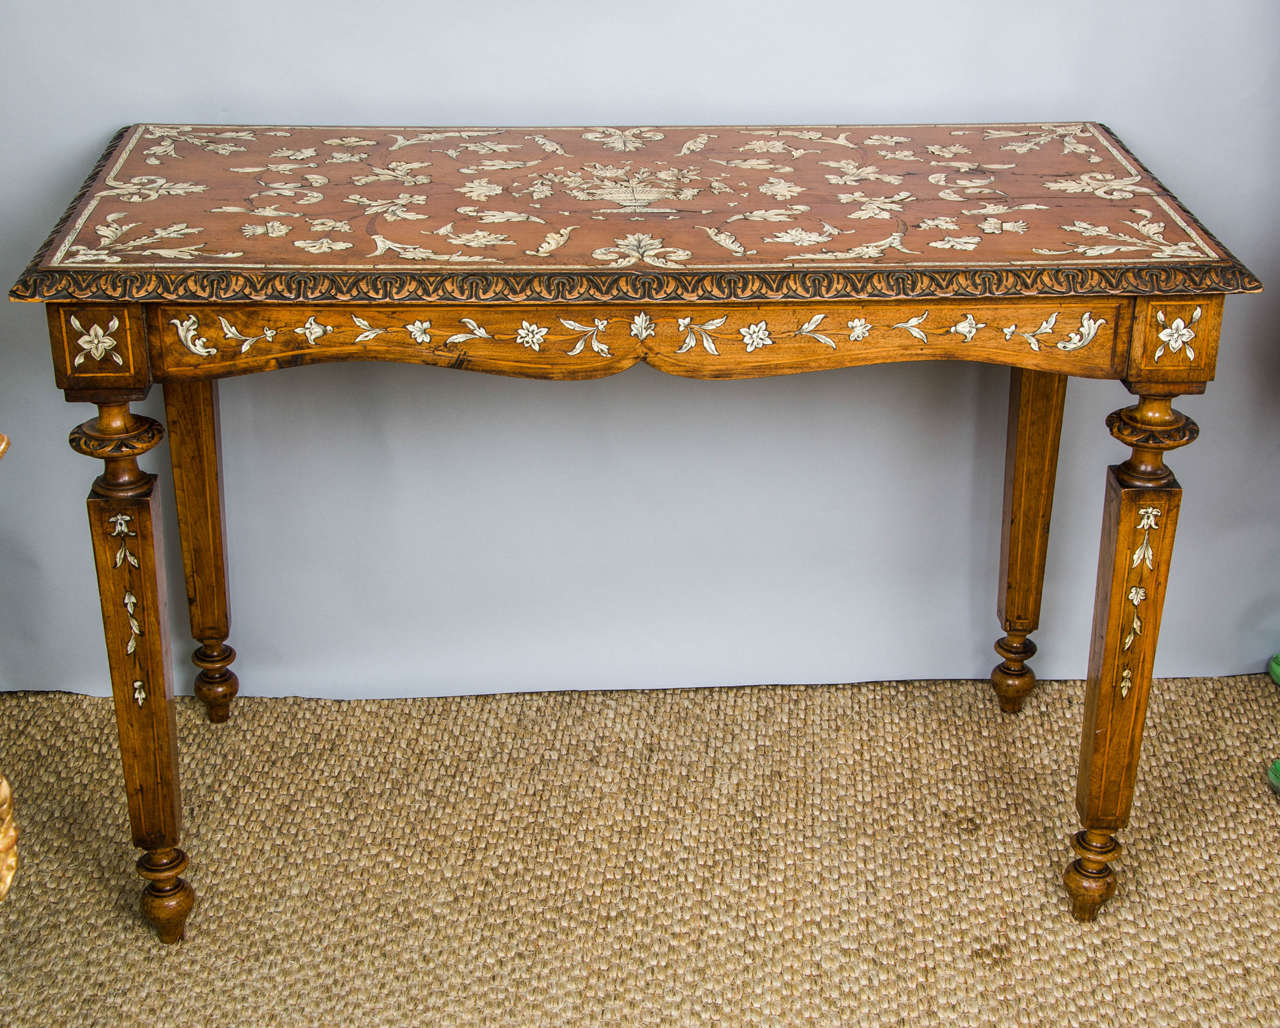 A splendid Italian Inlaid walnut centre table on inlaid tapering square legs. The intricate marquetry work showing floral trails and scrolling foliage centred with a spectacularly beautiful Satyr handled urn from which flowers emerge. The outer edge